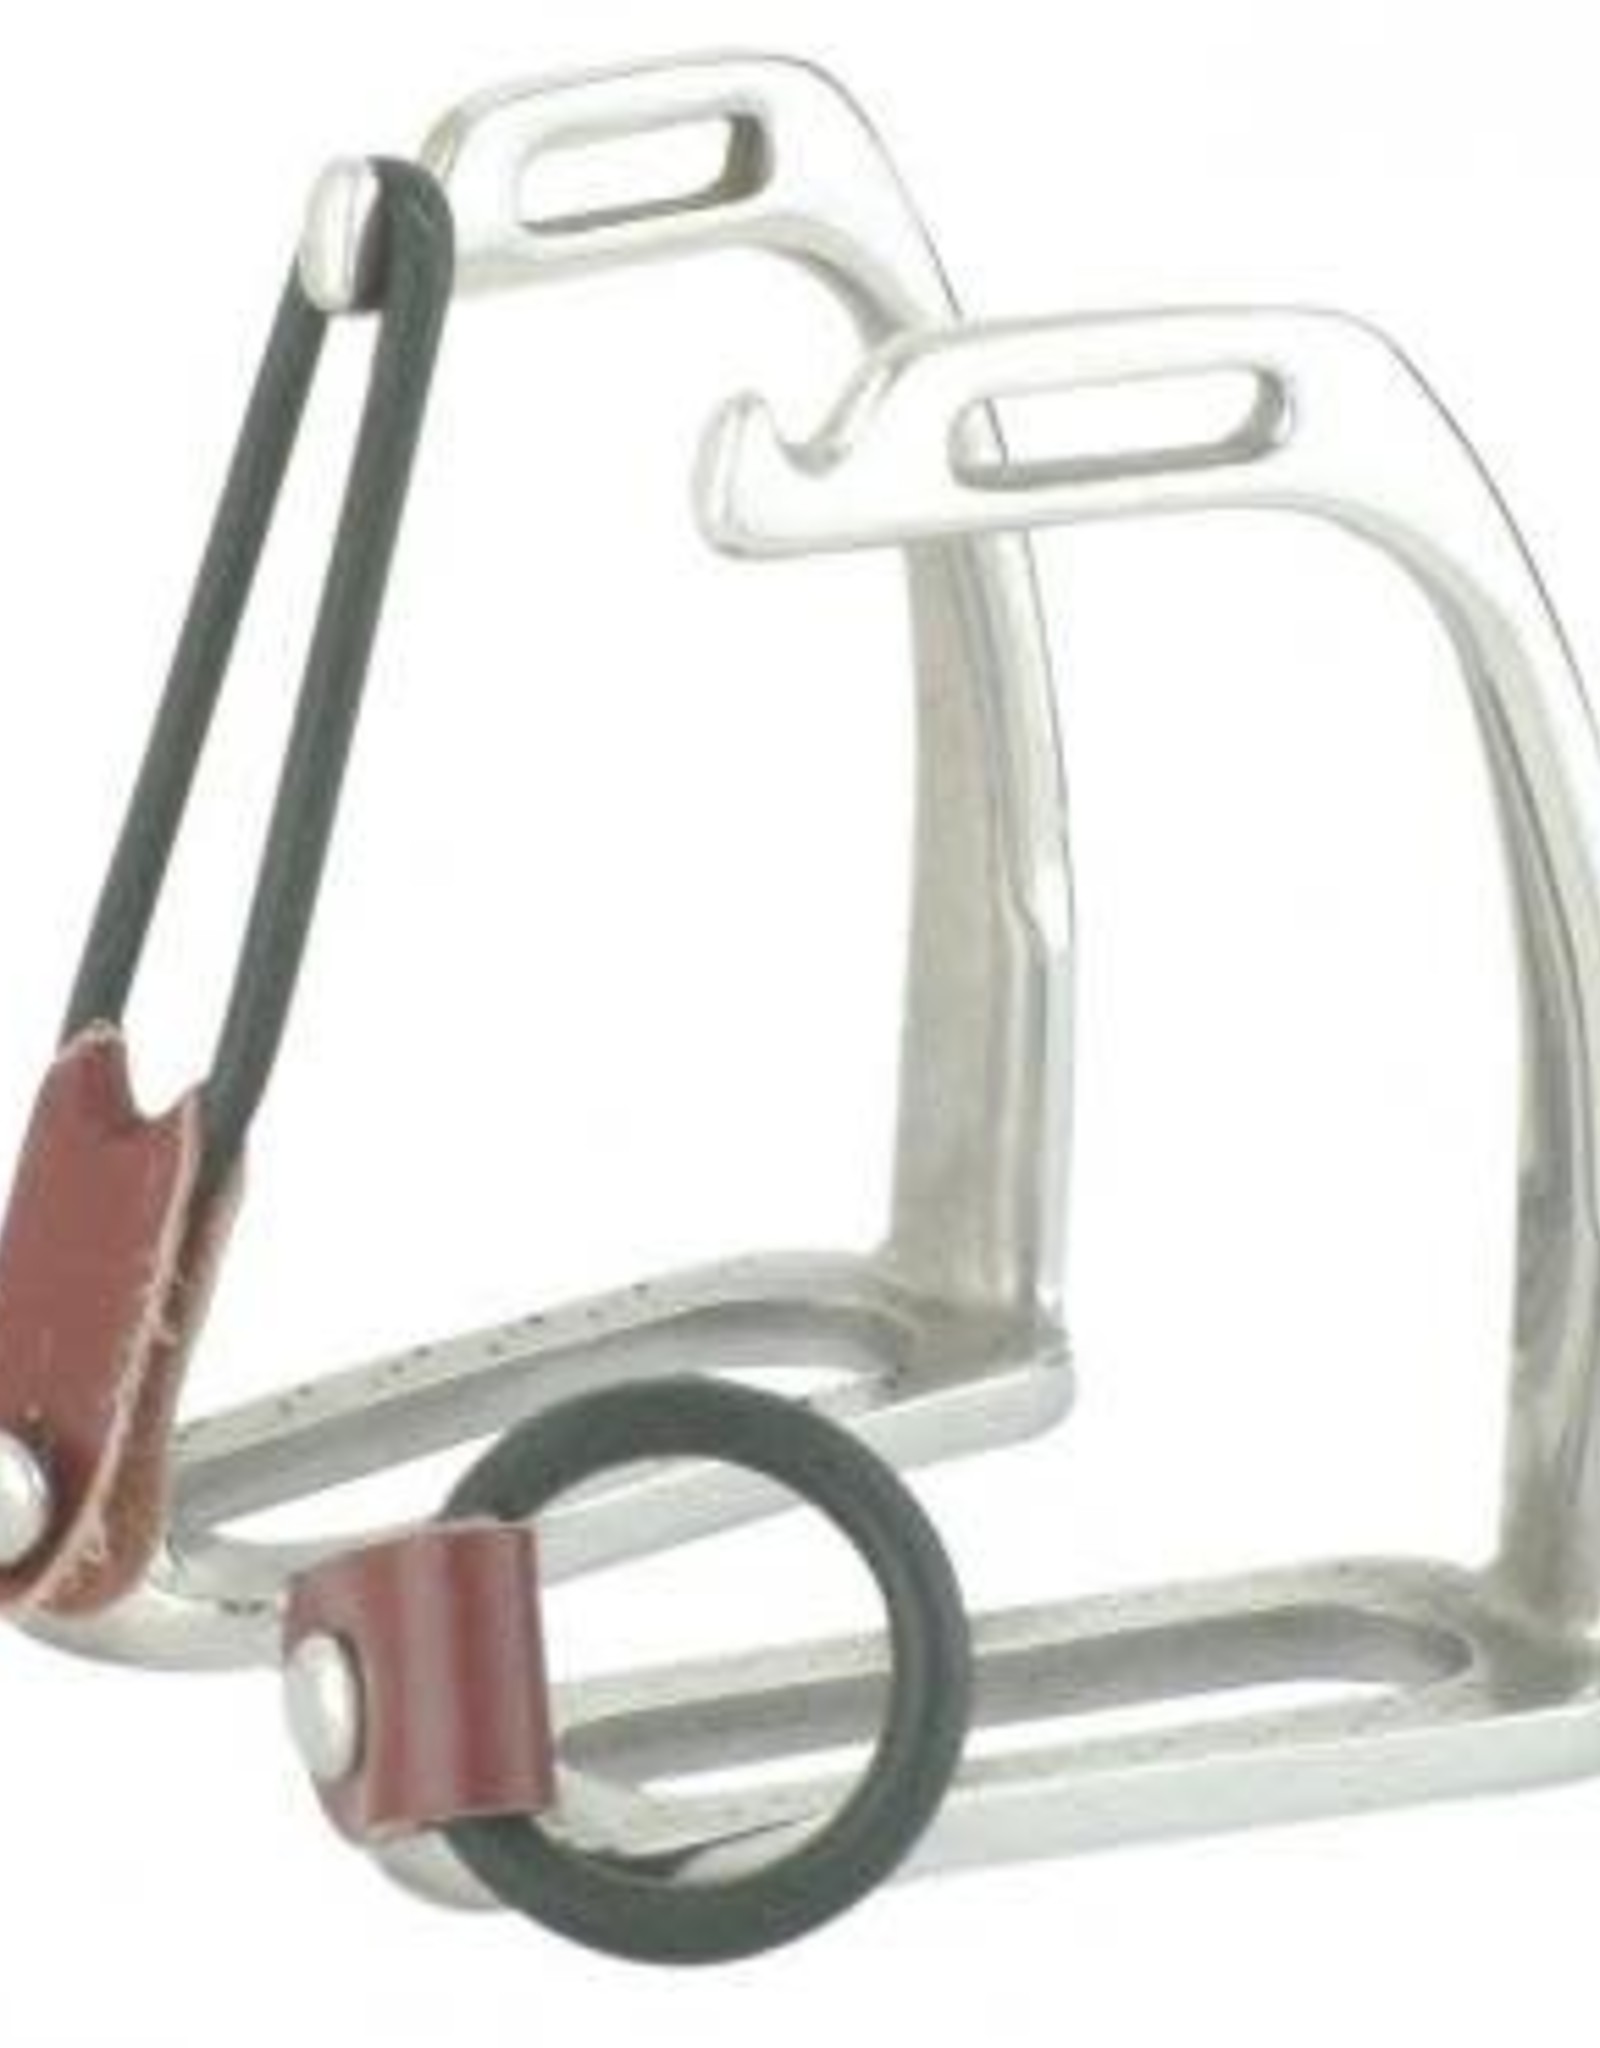 SS Peacock Safety Irons - 11.5cm